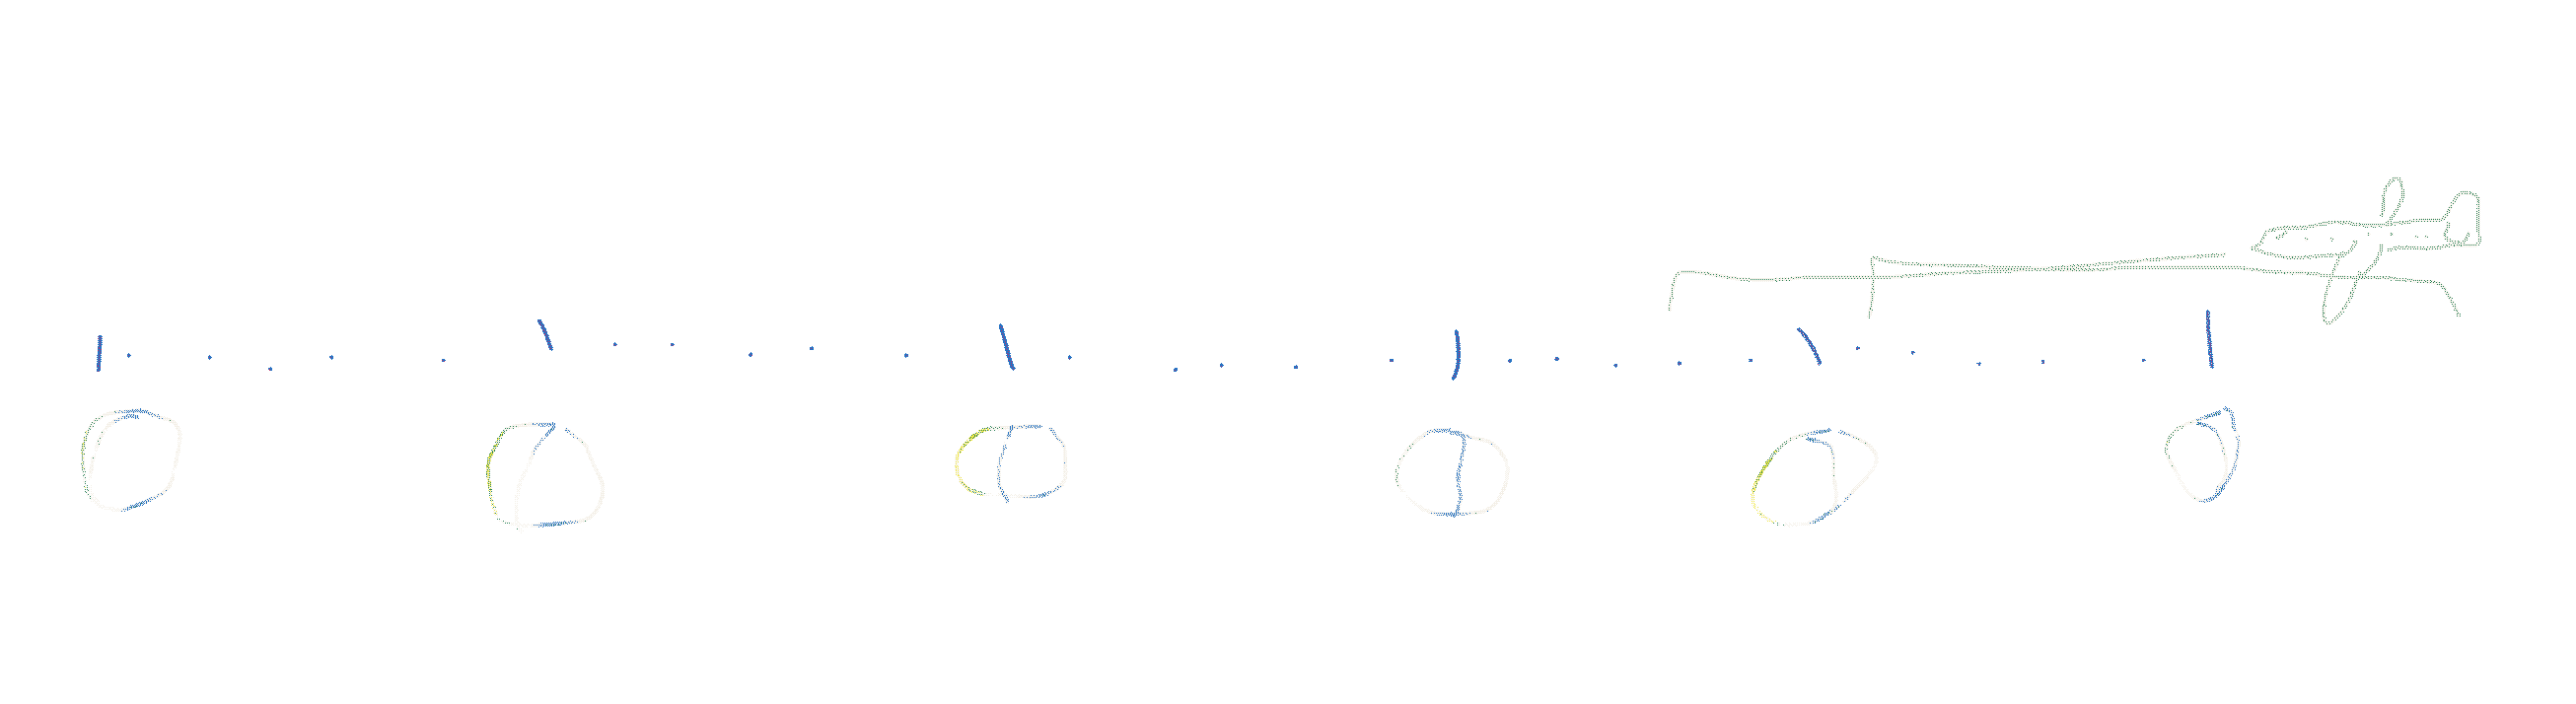 A ruler with major ticks and minor ticks, from left to right. Immediately below it, a series of icons showing the phases of shadow passing on a sphere (e.g., the earth, moon, or sun - it is not specific) at each major tick. Above, to the upper right, a plane traveling from right to left, with a horizontal bracket howing it traveling backwards along the ruler.